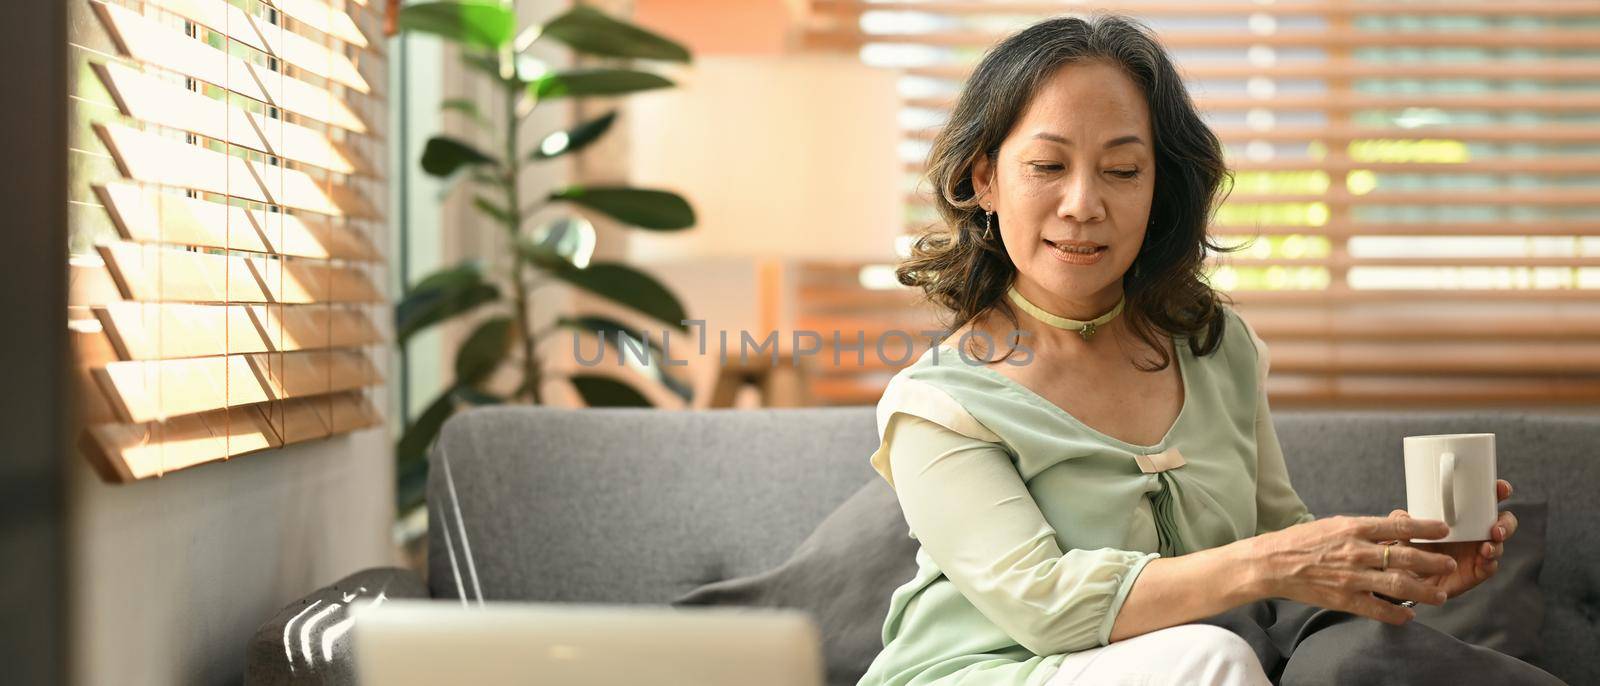 Retired lady relaxing on comfortable couch drinking herbal tea, enjoy stress free peaceful mood at the morning at home.